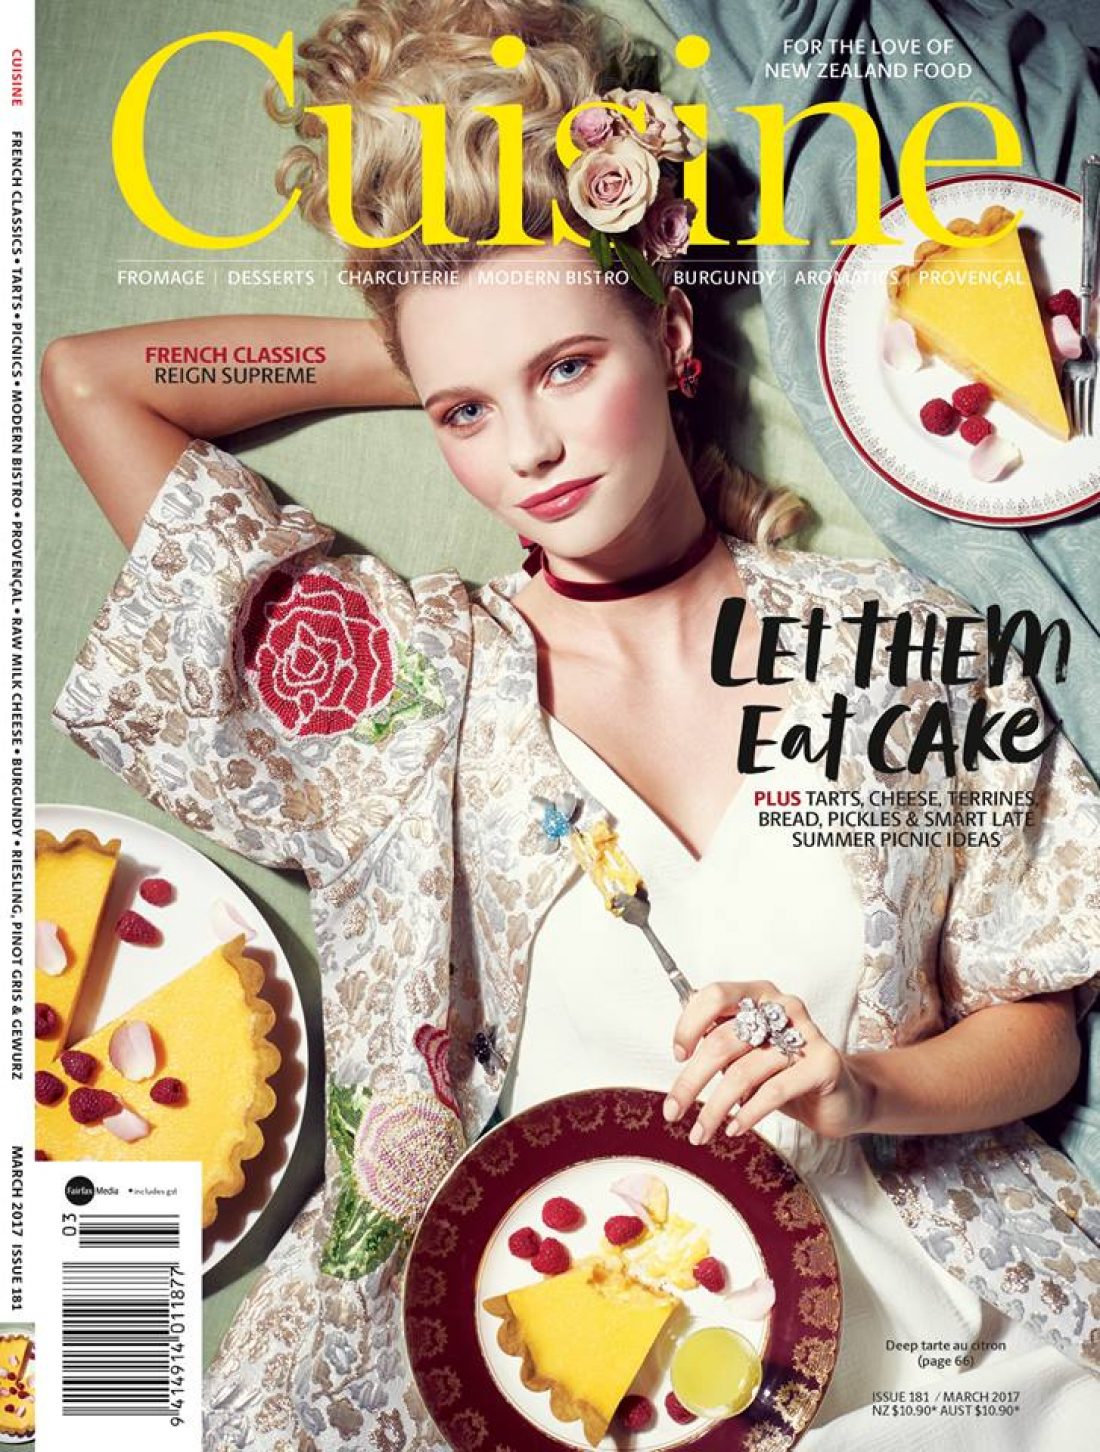 Carla photographed by Stephen Tilley for the Cover of Cuisine Magazine, Mua: Josie Wignall using MAC Cosmetics